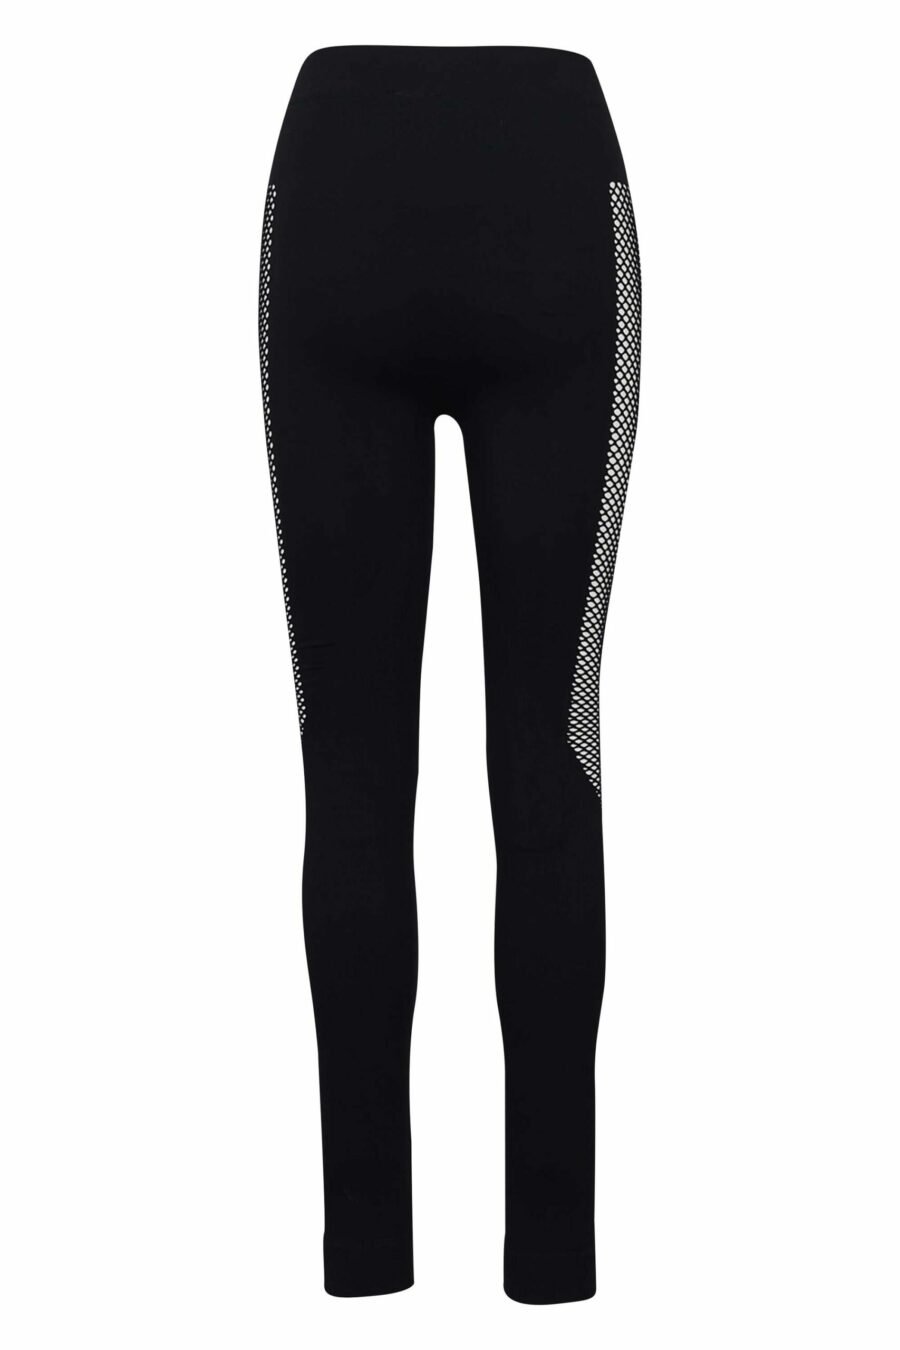 Black leggings with logo and side mesh - 889316611816 1 scaled